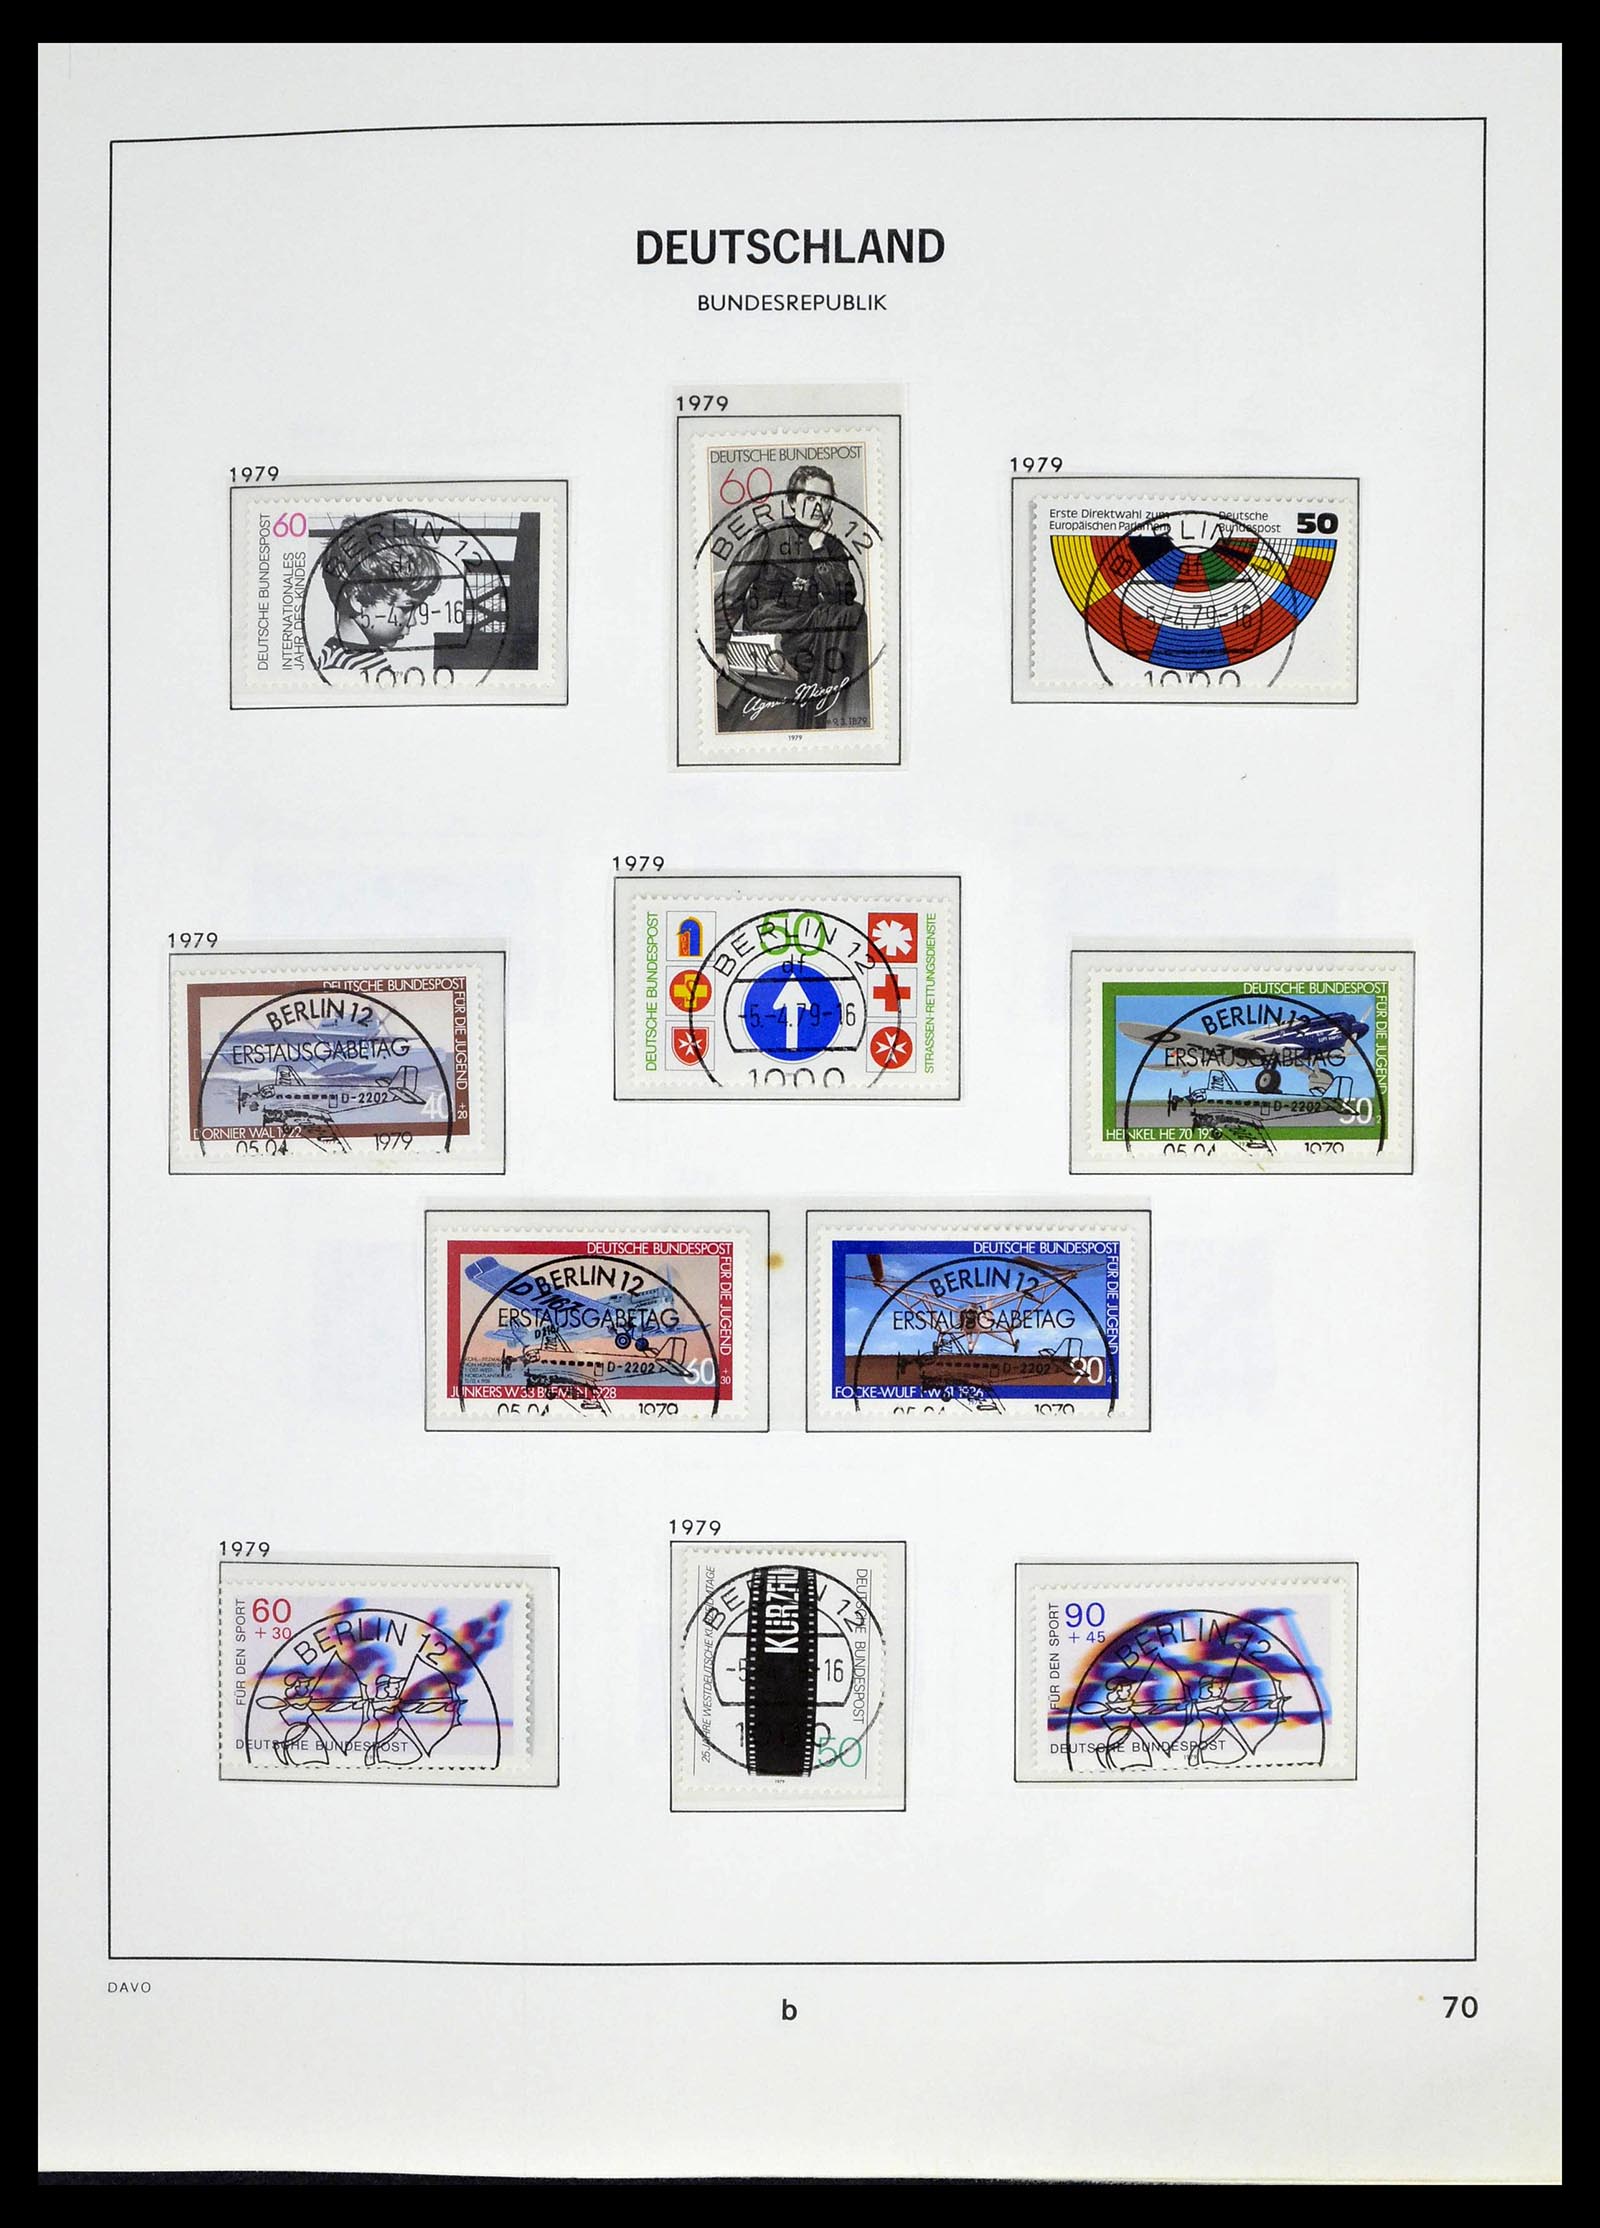 39326 0073 - Stamp collection 39326 Bundespost 1949-2003.